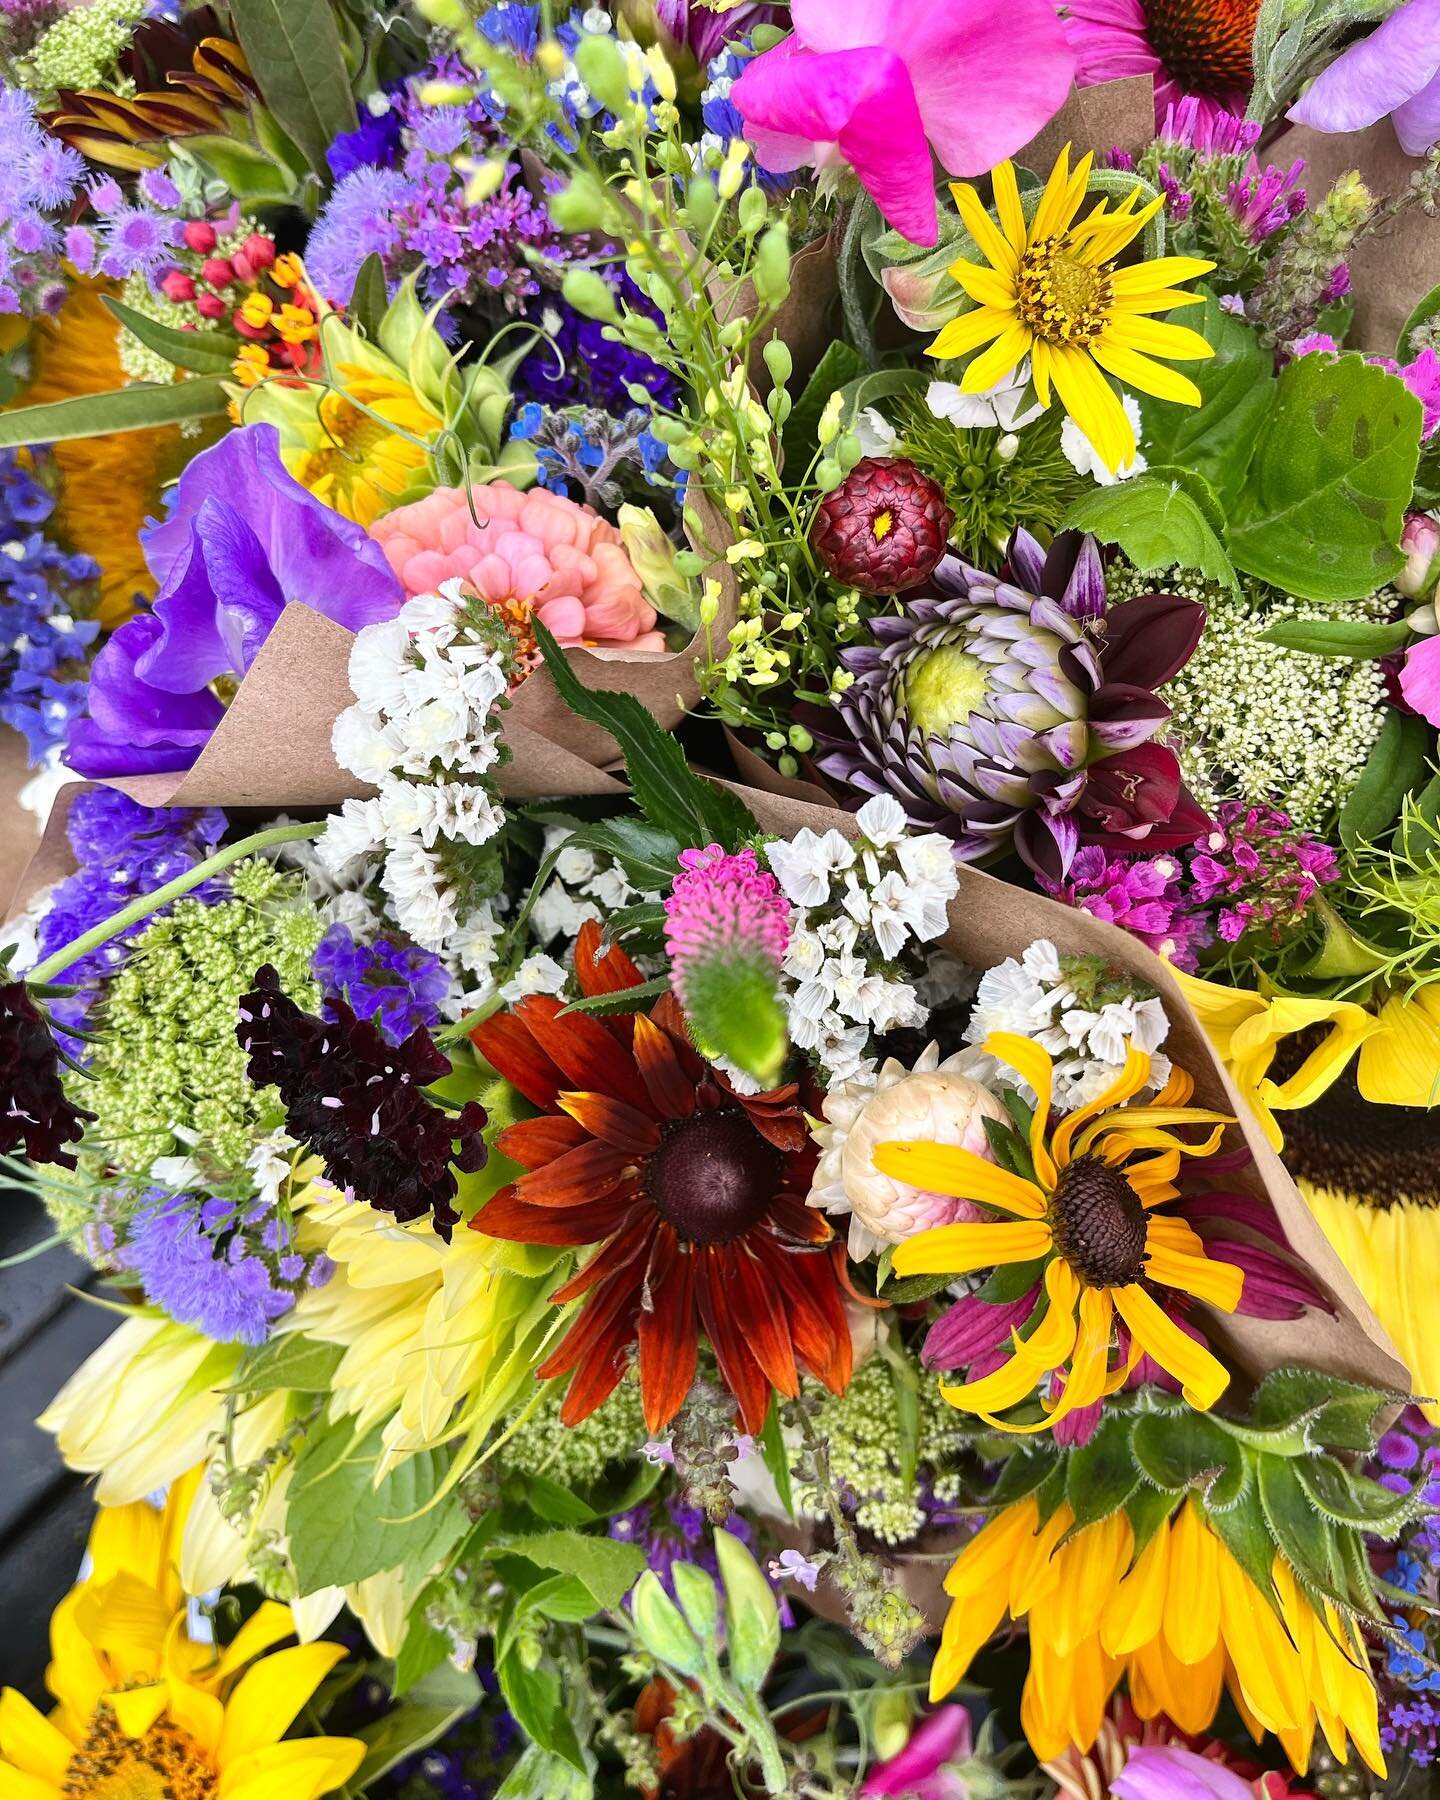 Bursts of yellows, pinks, purples and more kicked off the start of summer week 9. The newest (and most diverse) round of sunnies joining the end of the sweet peas and the start of the dahlias.
.
The infusion of new colorful varieties feels a little l